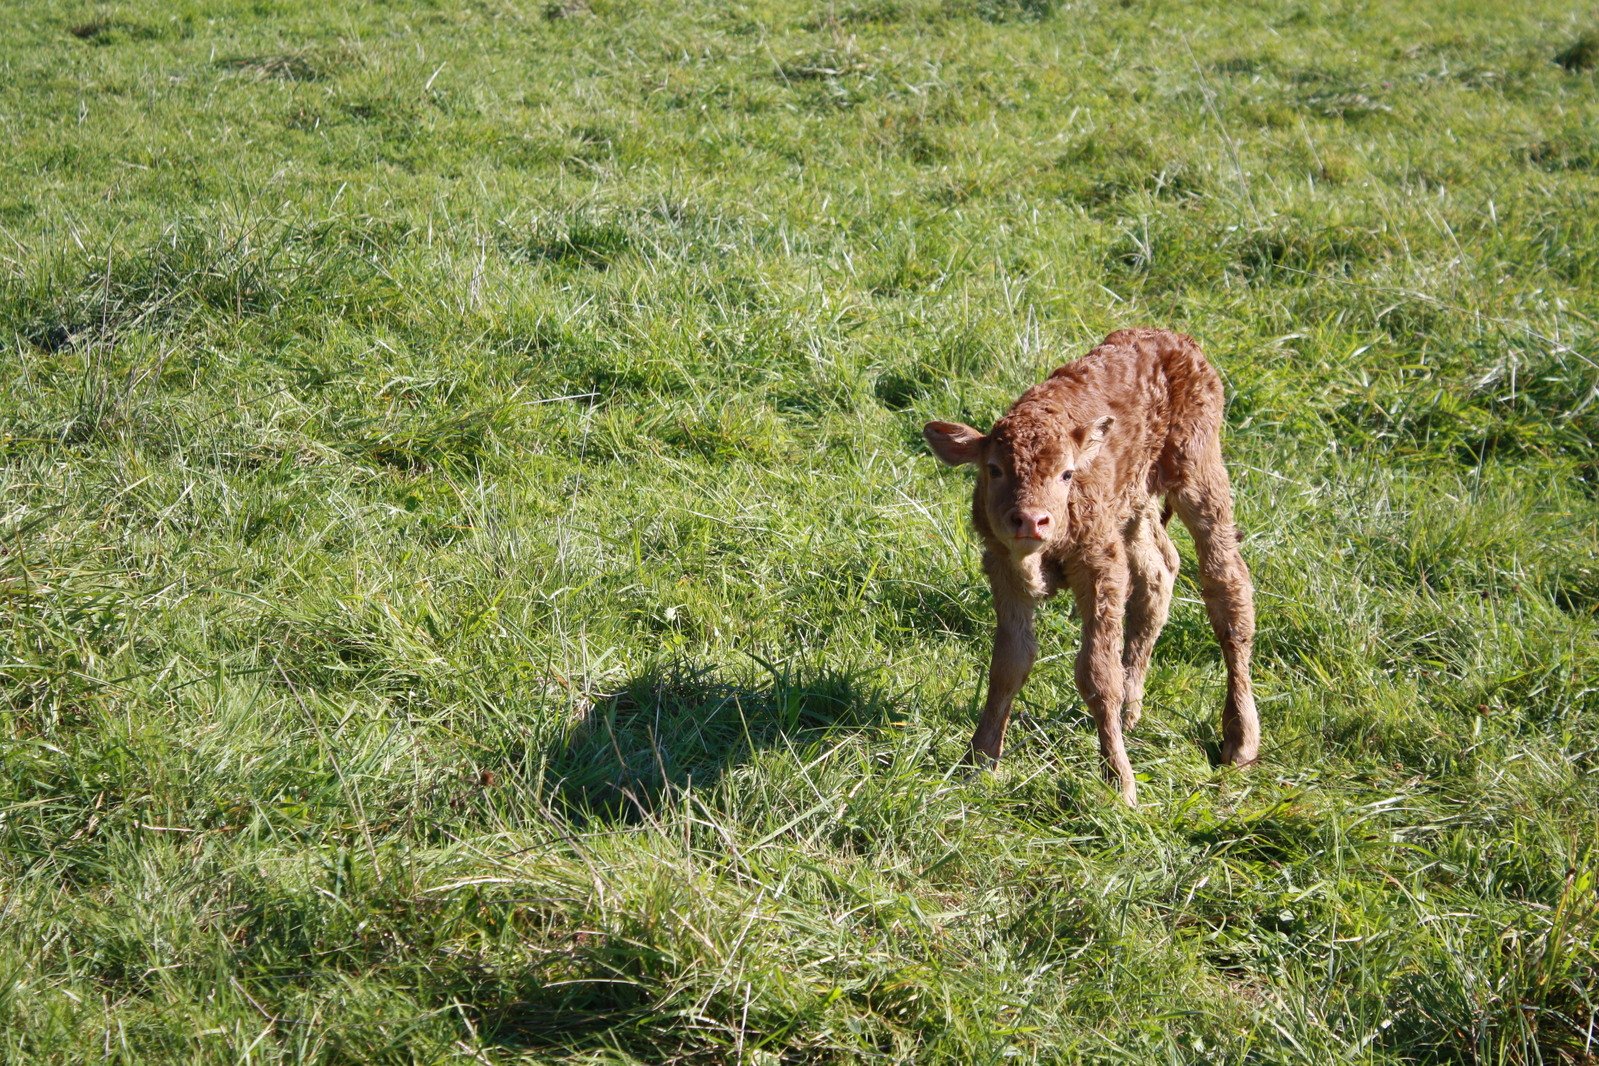 the baby cow is standing in the green grass